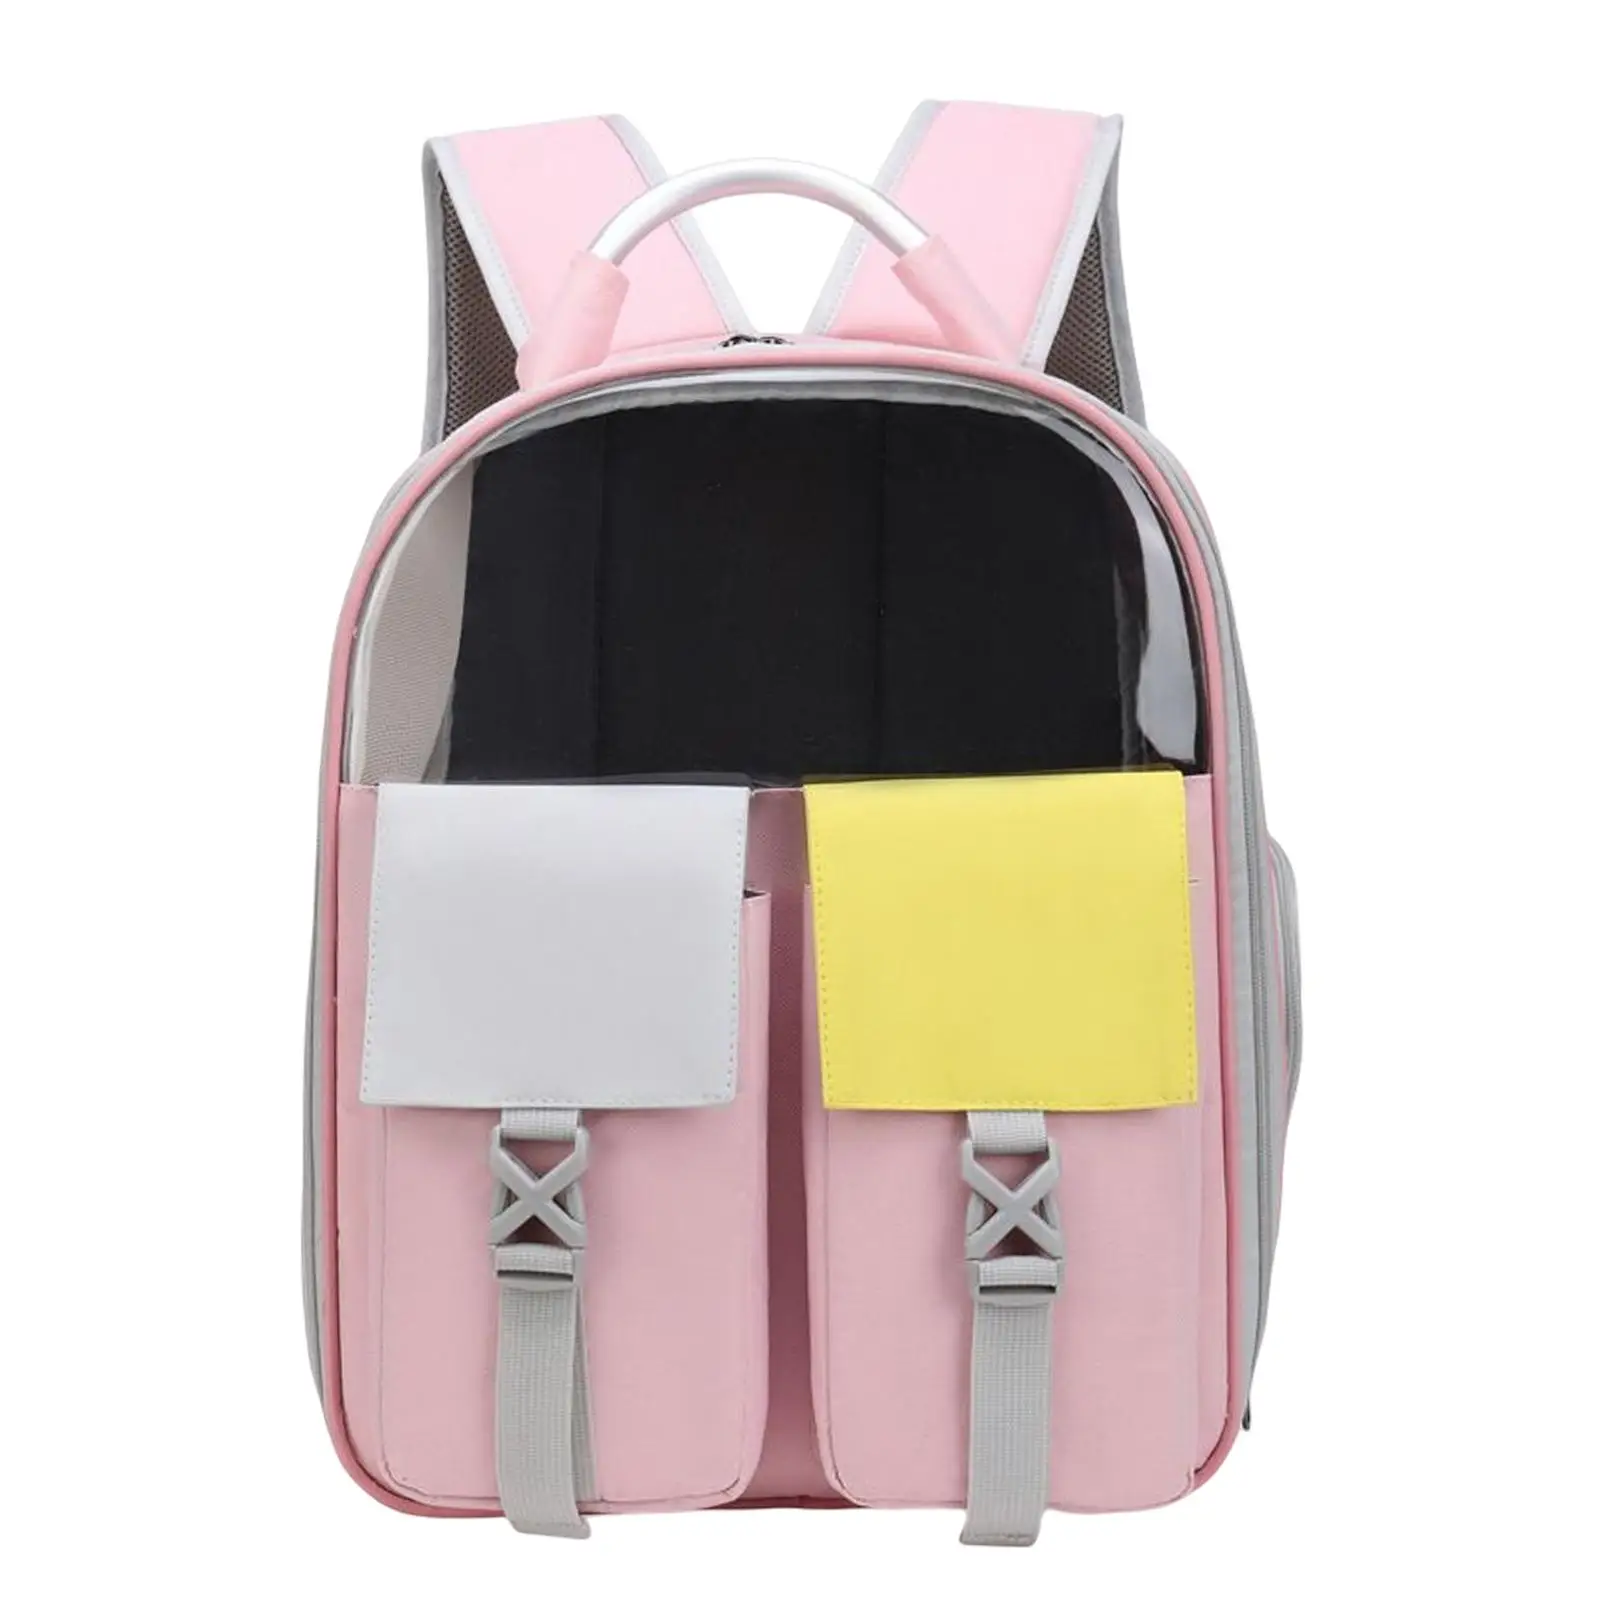 Breathable Cat Carrier Backpack Travel Bag with Shoulder Strap Tote Carrying Bag for Kitten Transparent Camping Walking Hiking